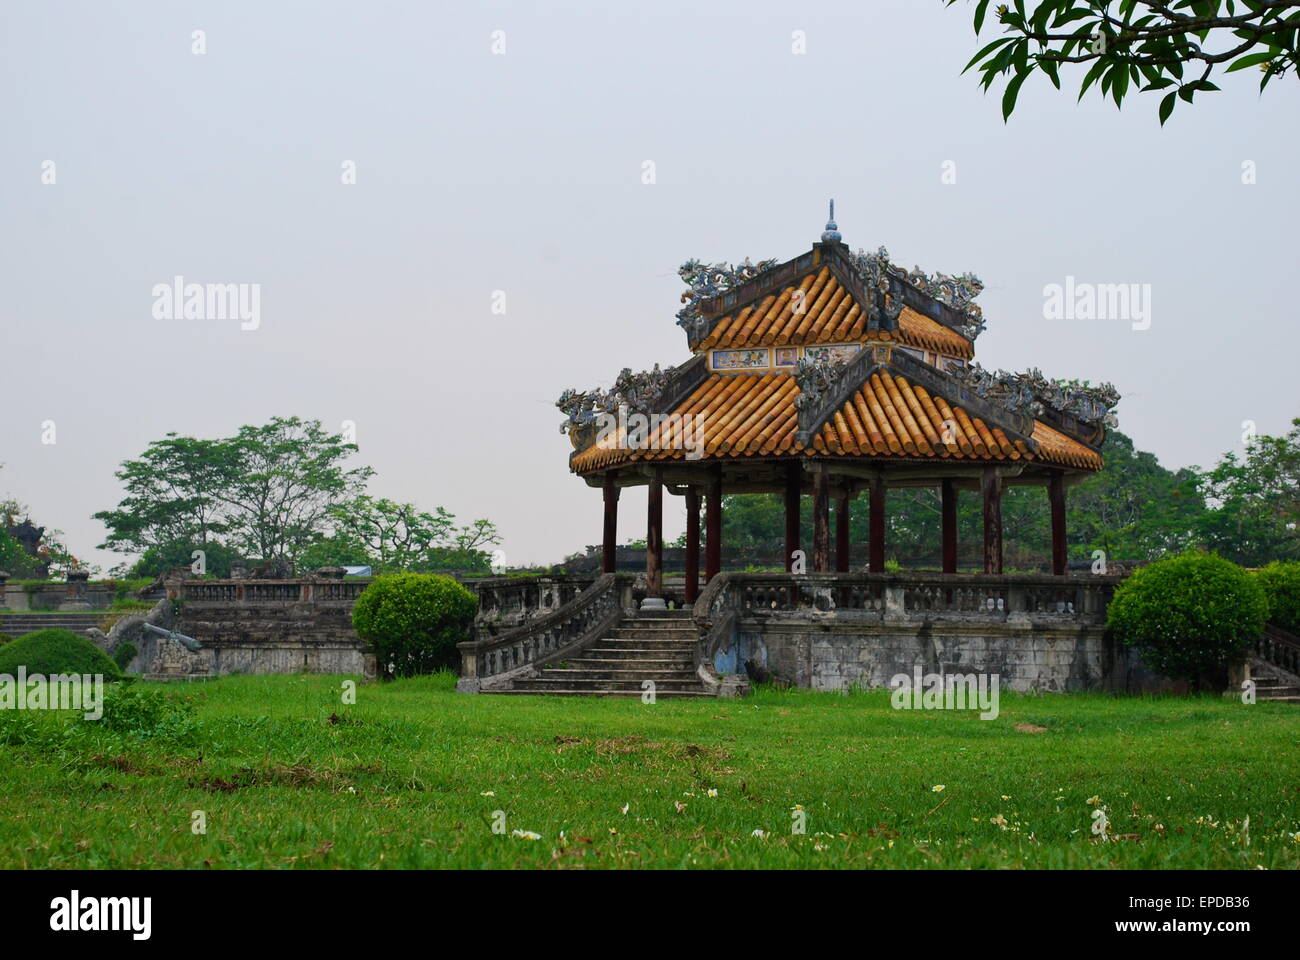 A pagoda in the grounds of the Imperial Citadel, Hue, Vietnam Stock Photo